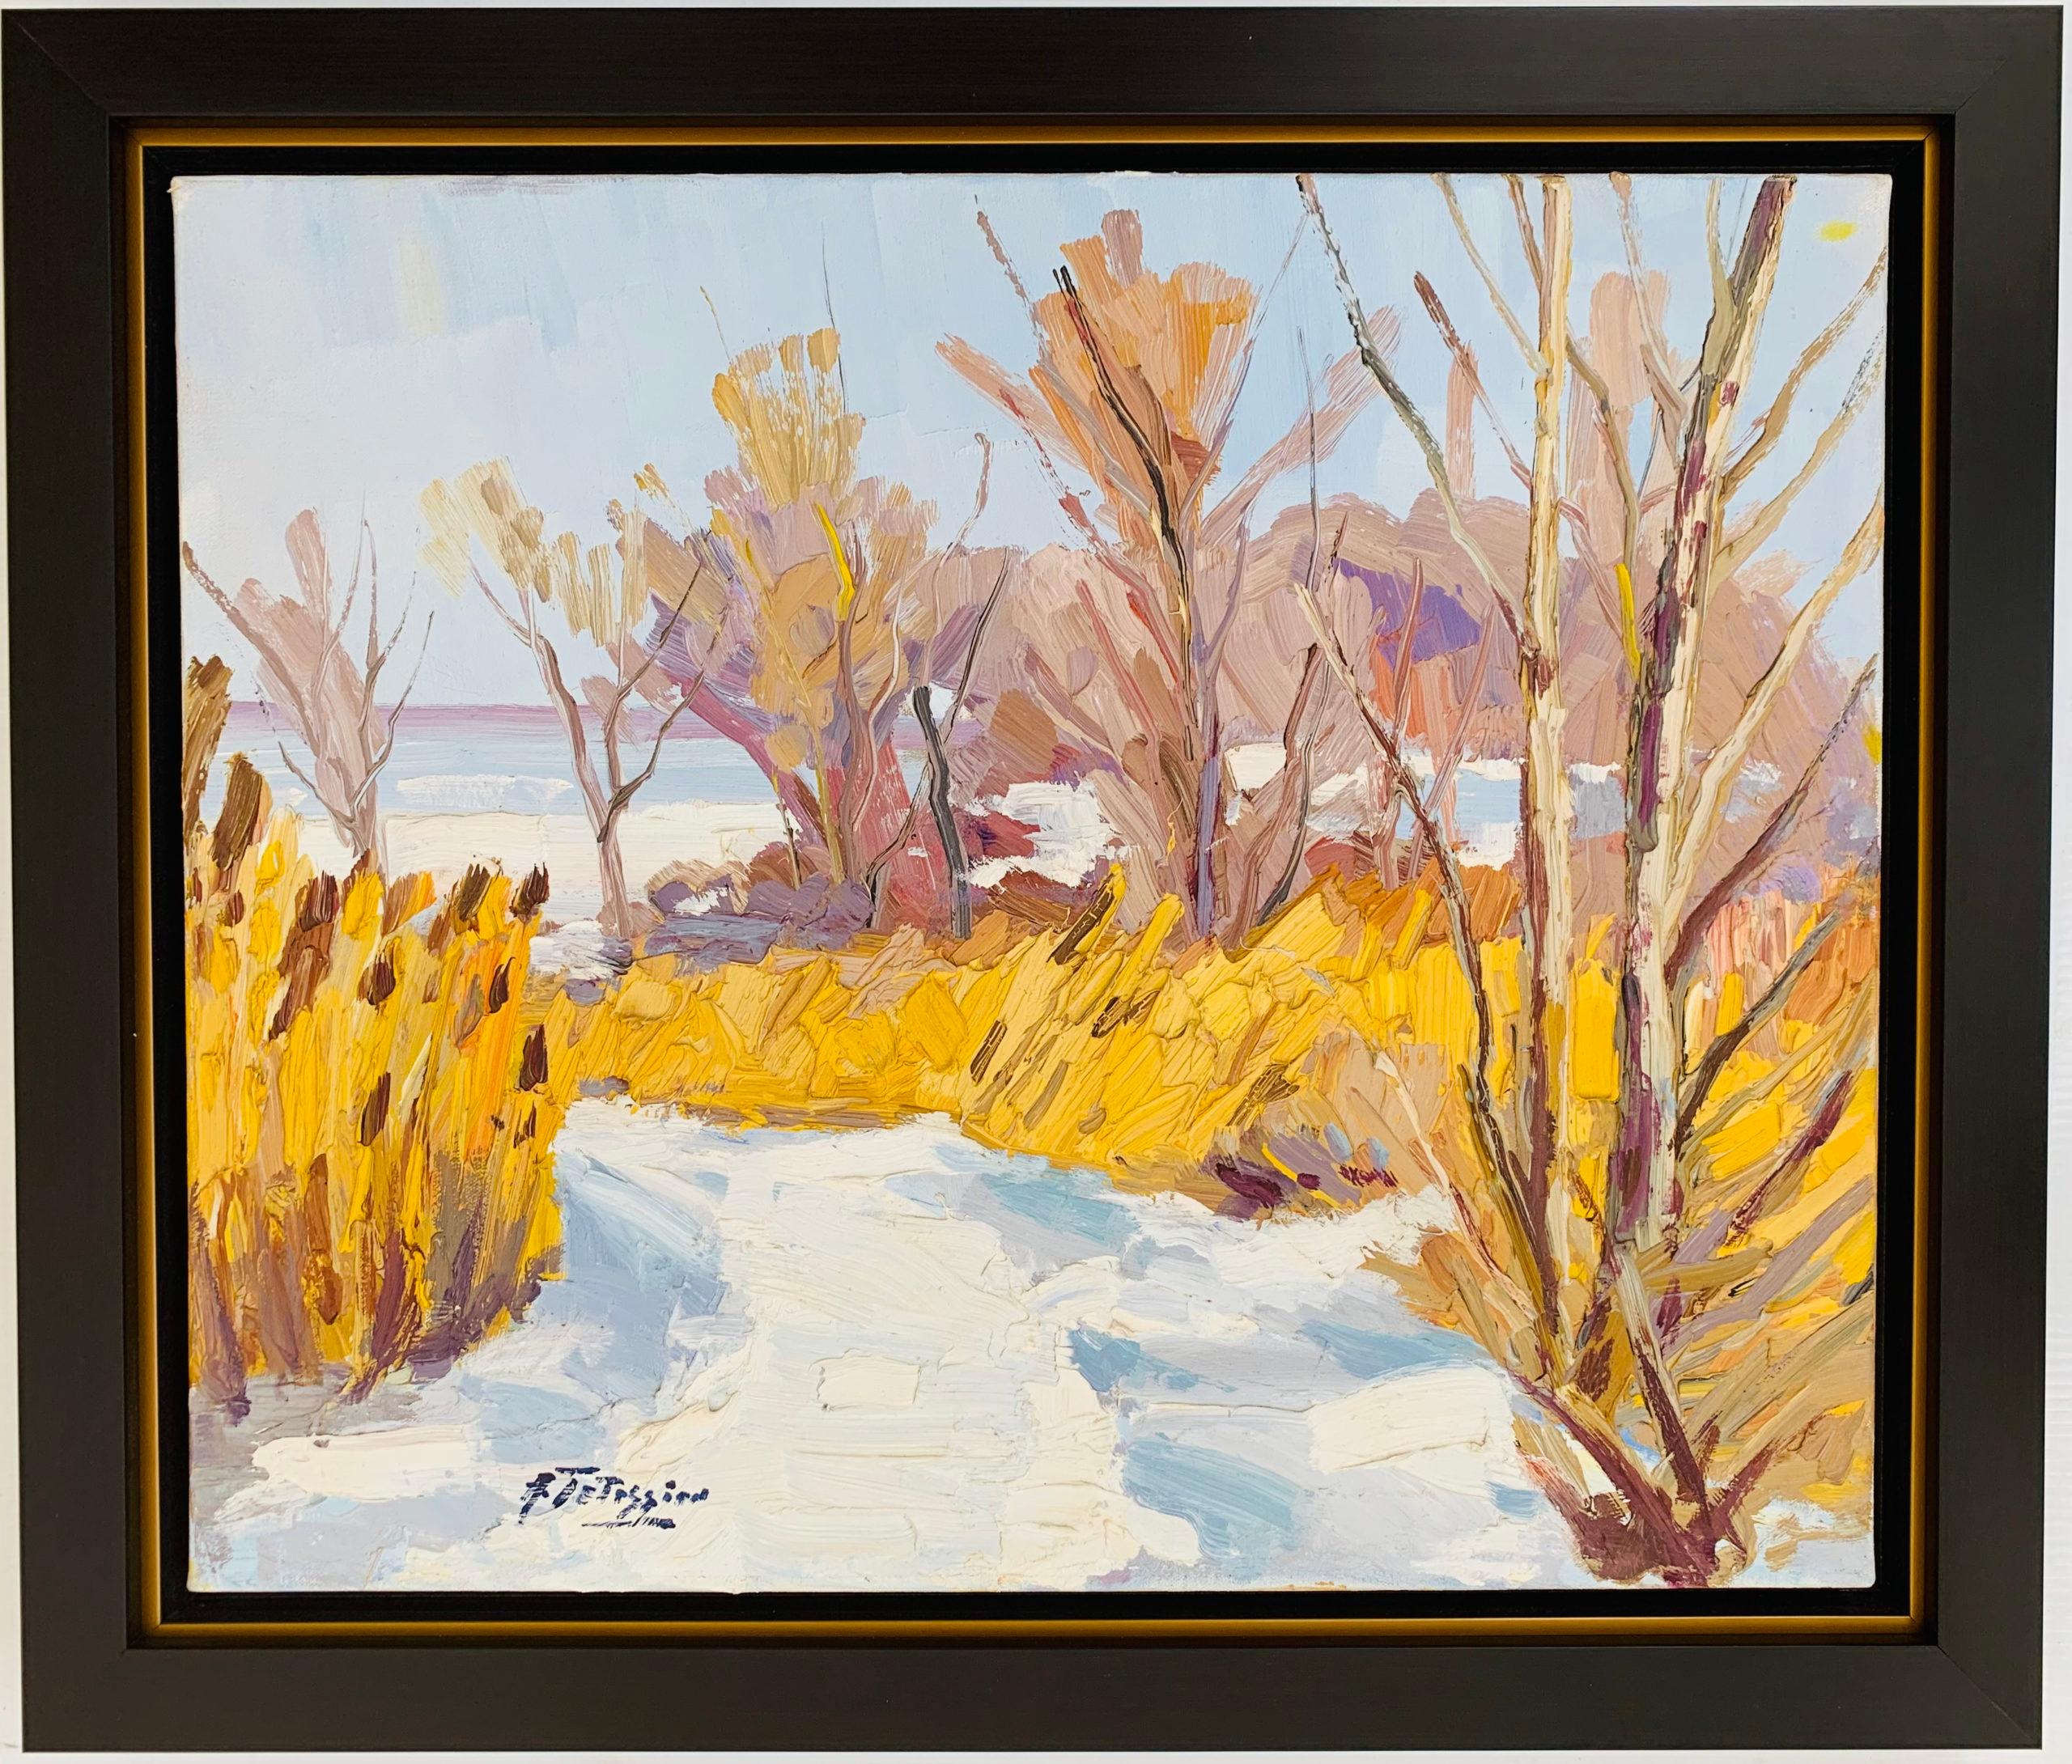 Pointe-Fortune, Quebec - Painting by Armand Tatossian